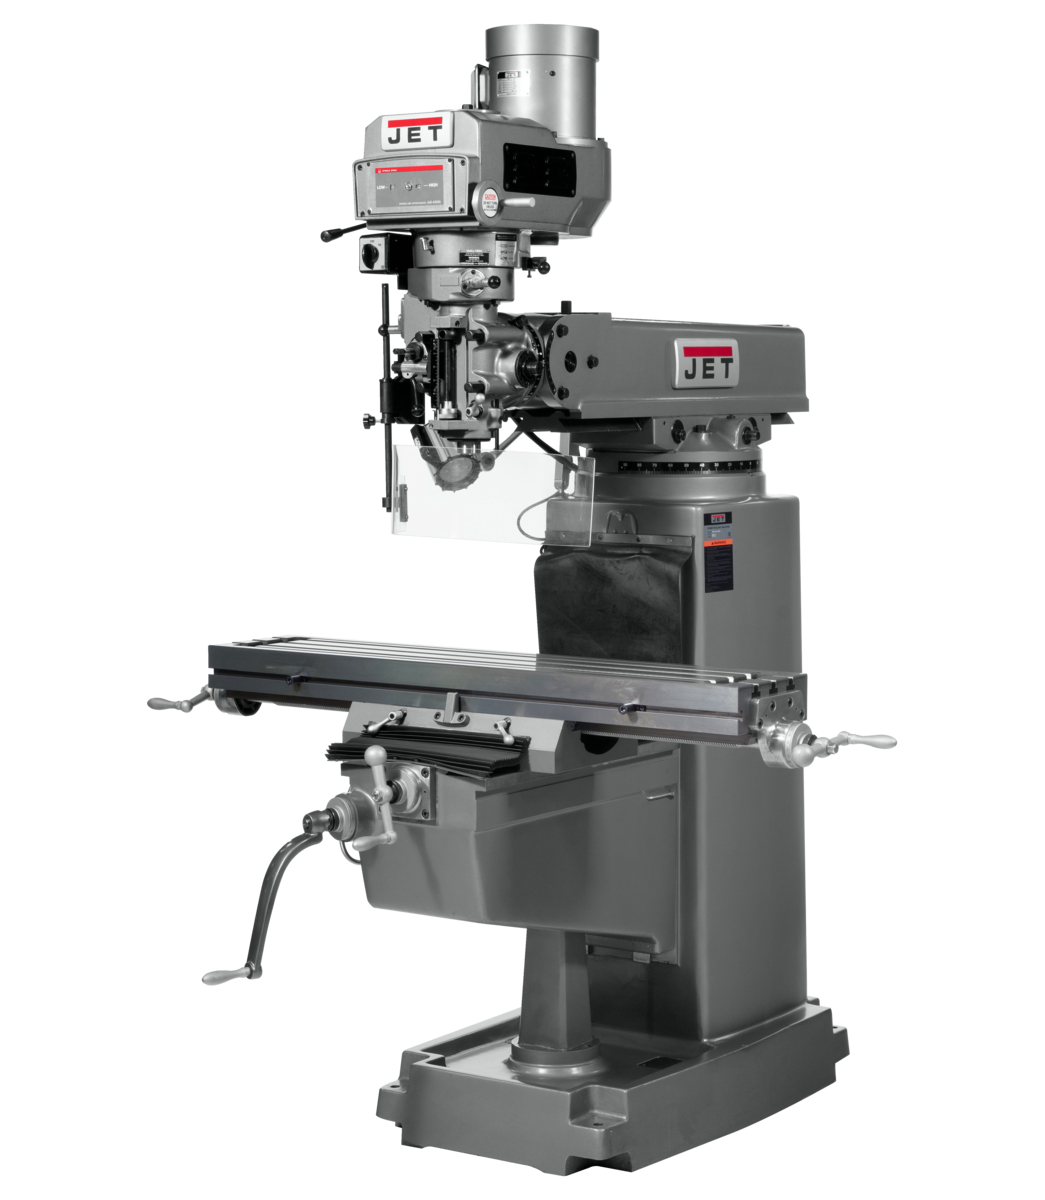 JTM-1050VS2 Mill With ACU-RITE 203 DRO With X-Axis Powerfeed, Power Draw Bar and 8" Riser Block